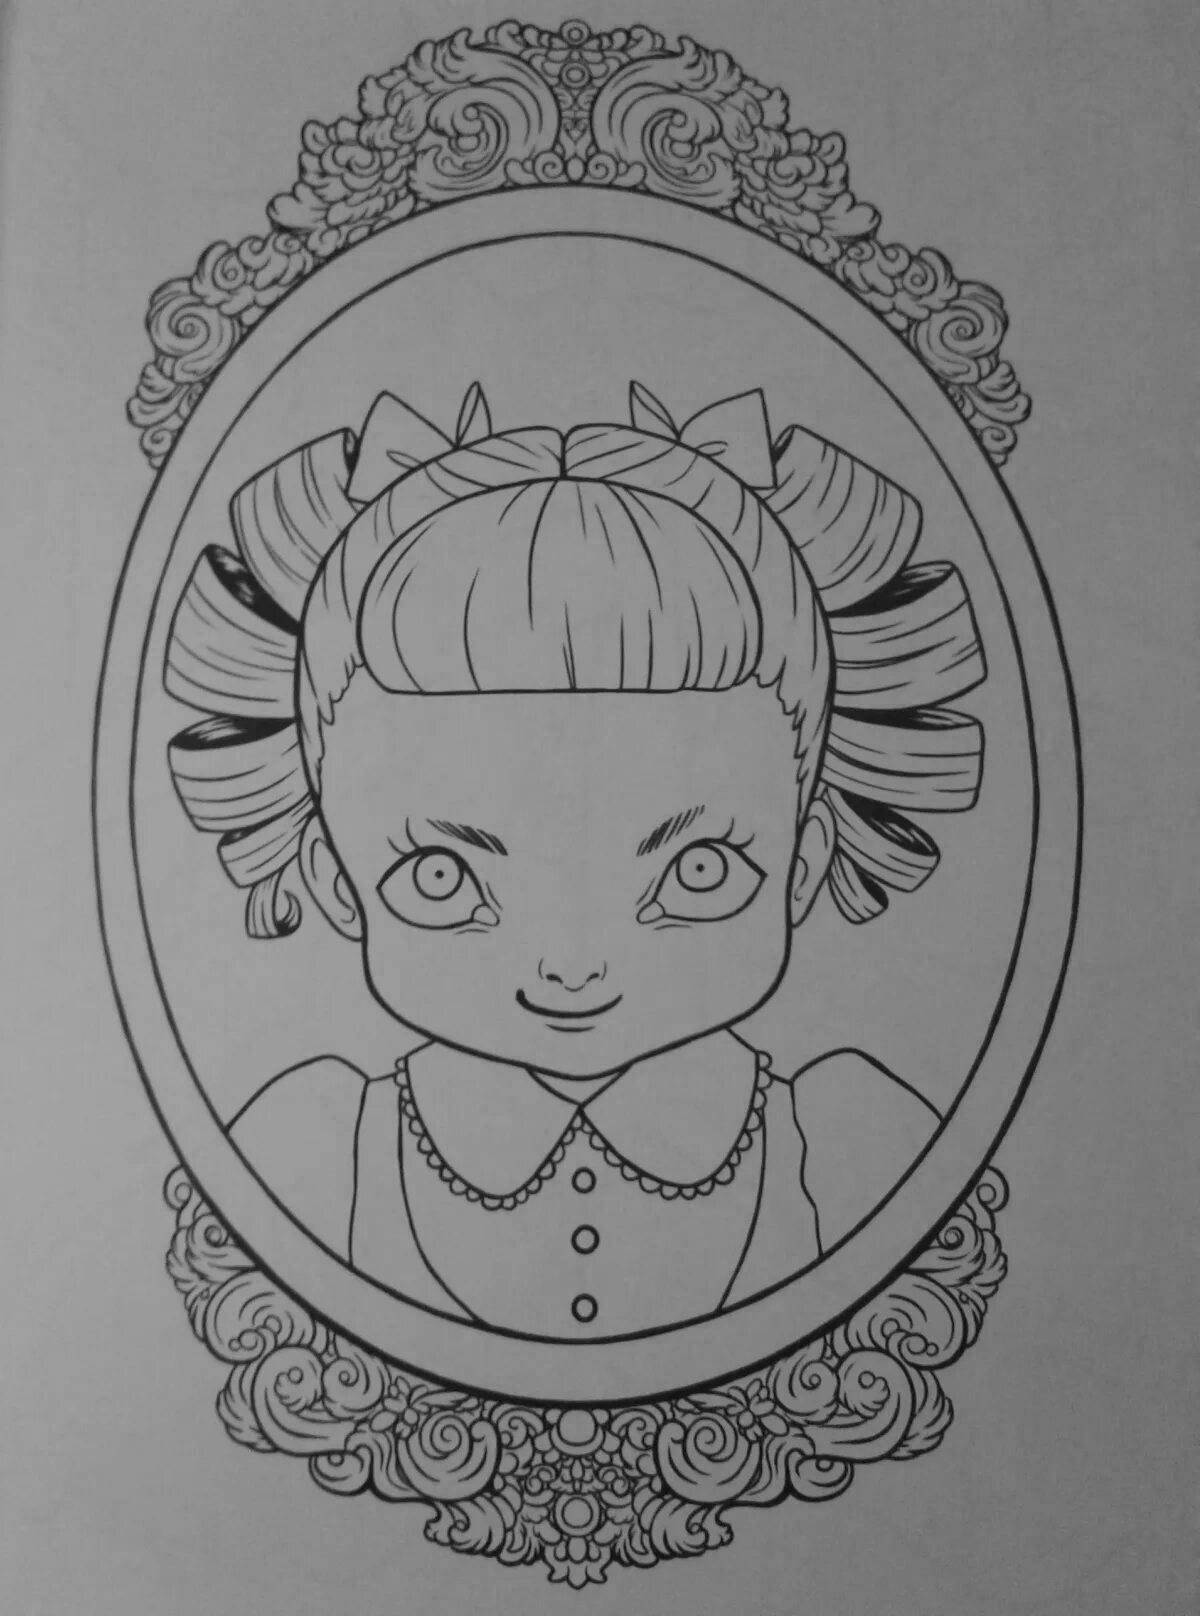 Coloring alluring cry baby melanie martinez